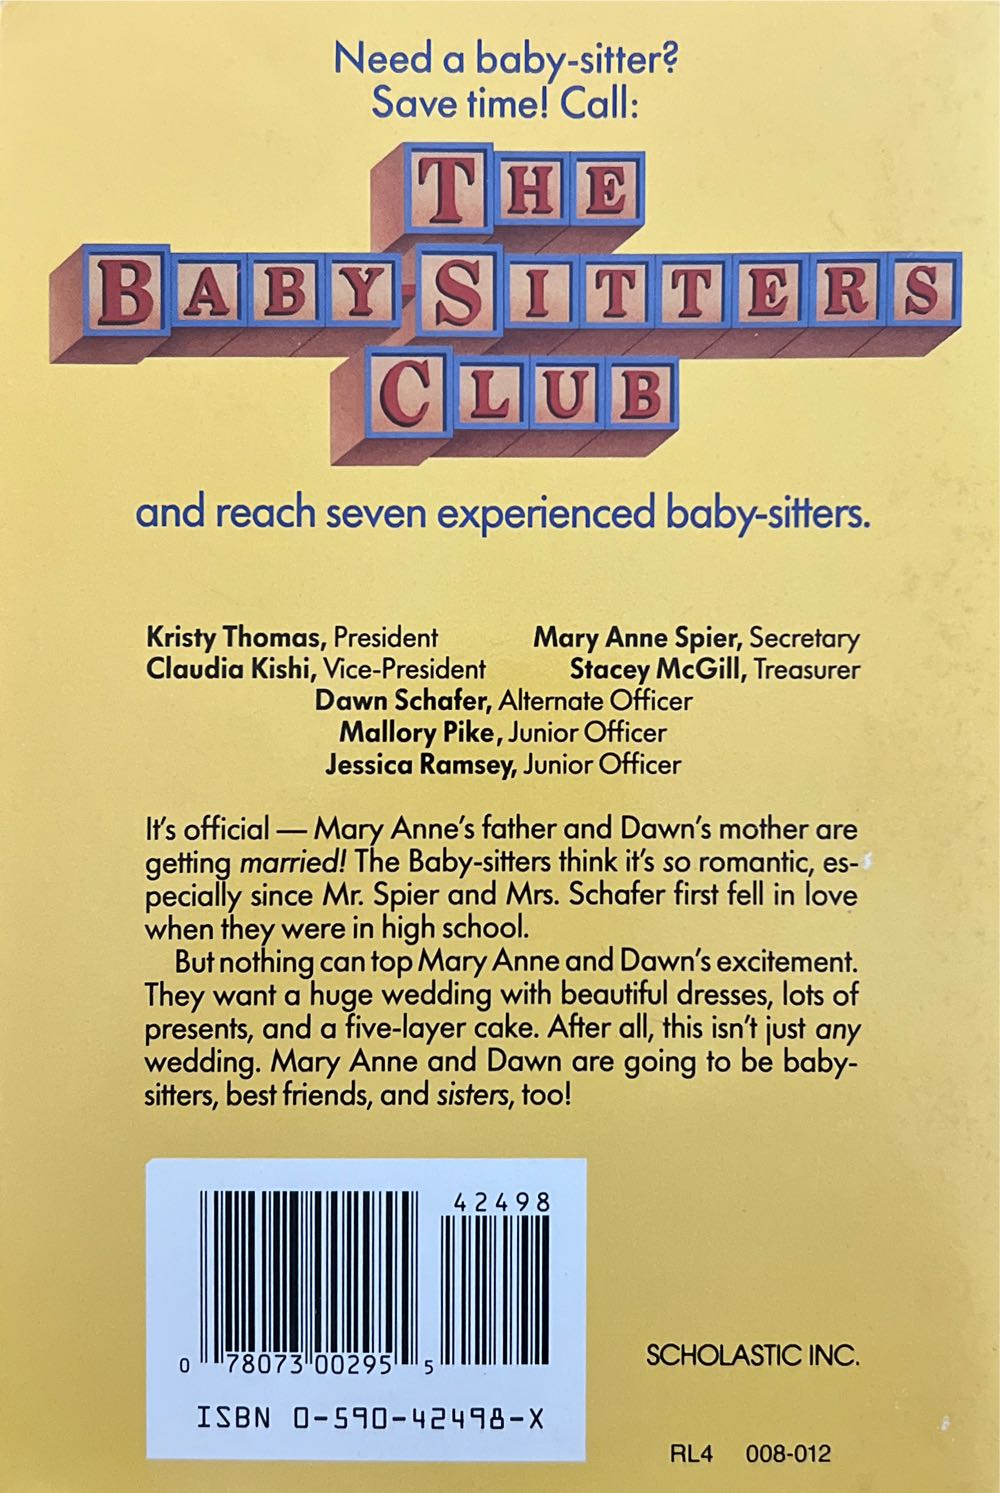 Baby-Sitters Club: Mary Anne and the Great Romance - Ann M. Martin (Scholastic, Inc. - Paperback) book collectible [Barcode 9780590424981] - Main Image 2